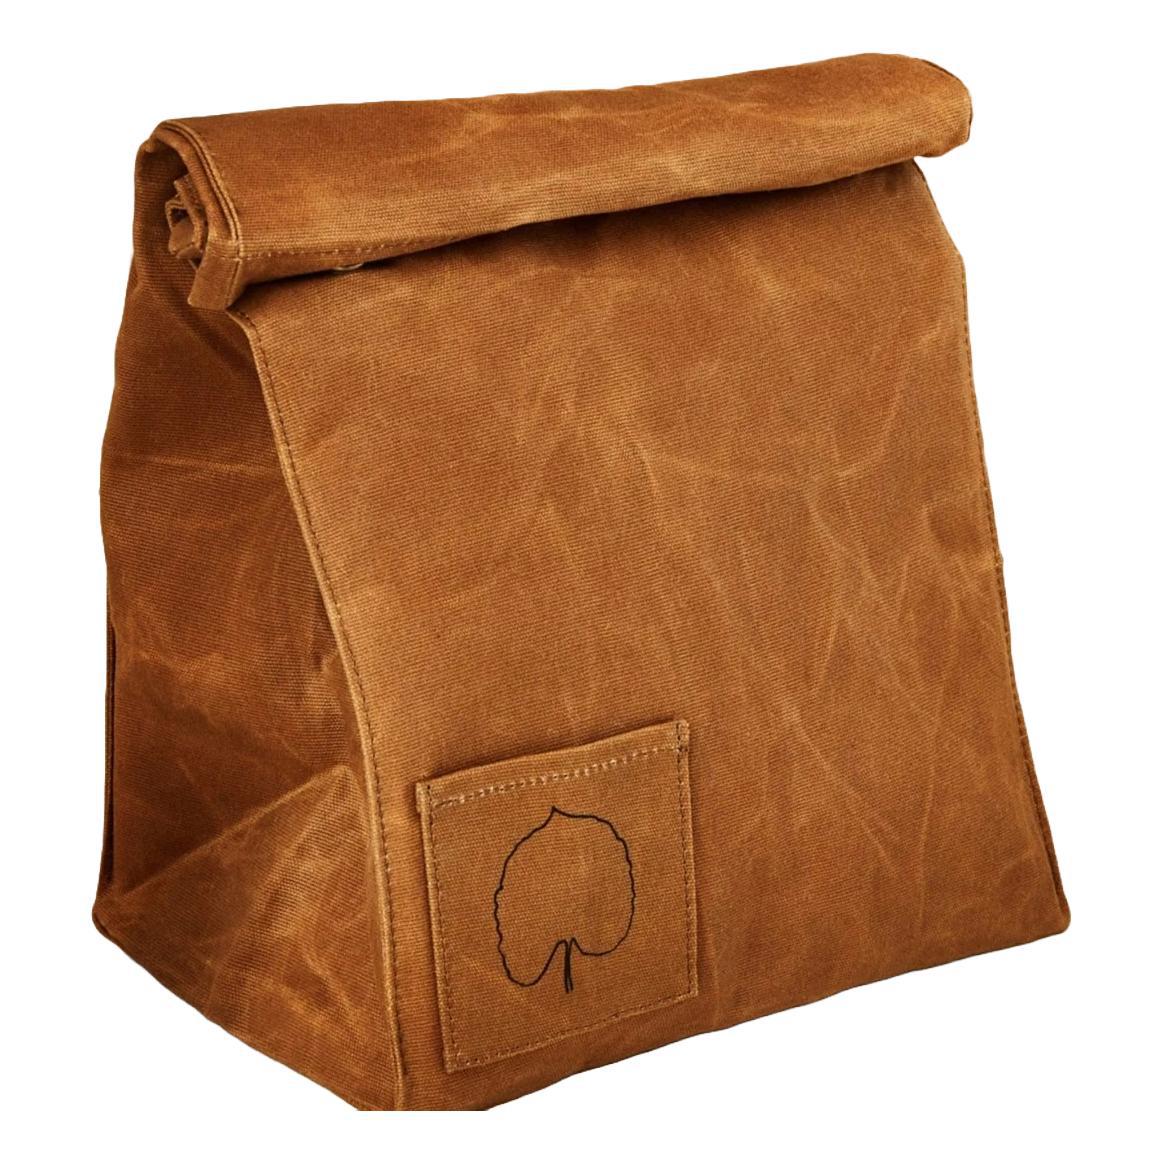 Eleven Madison Home - Insulated Lunch Bag - The Epicurean Trader